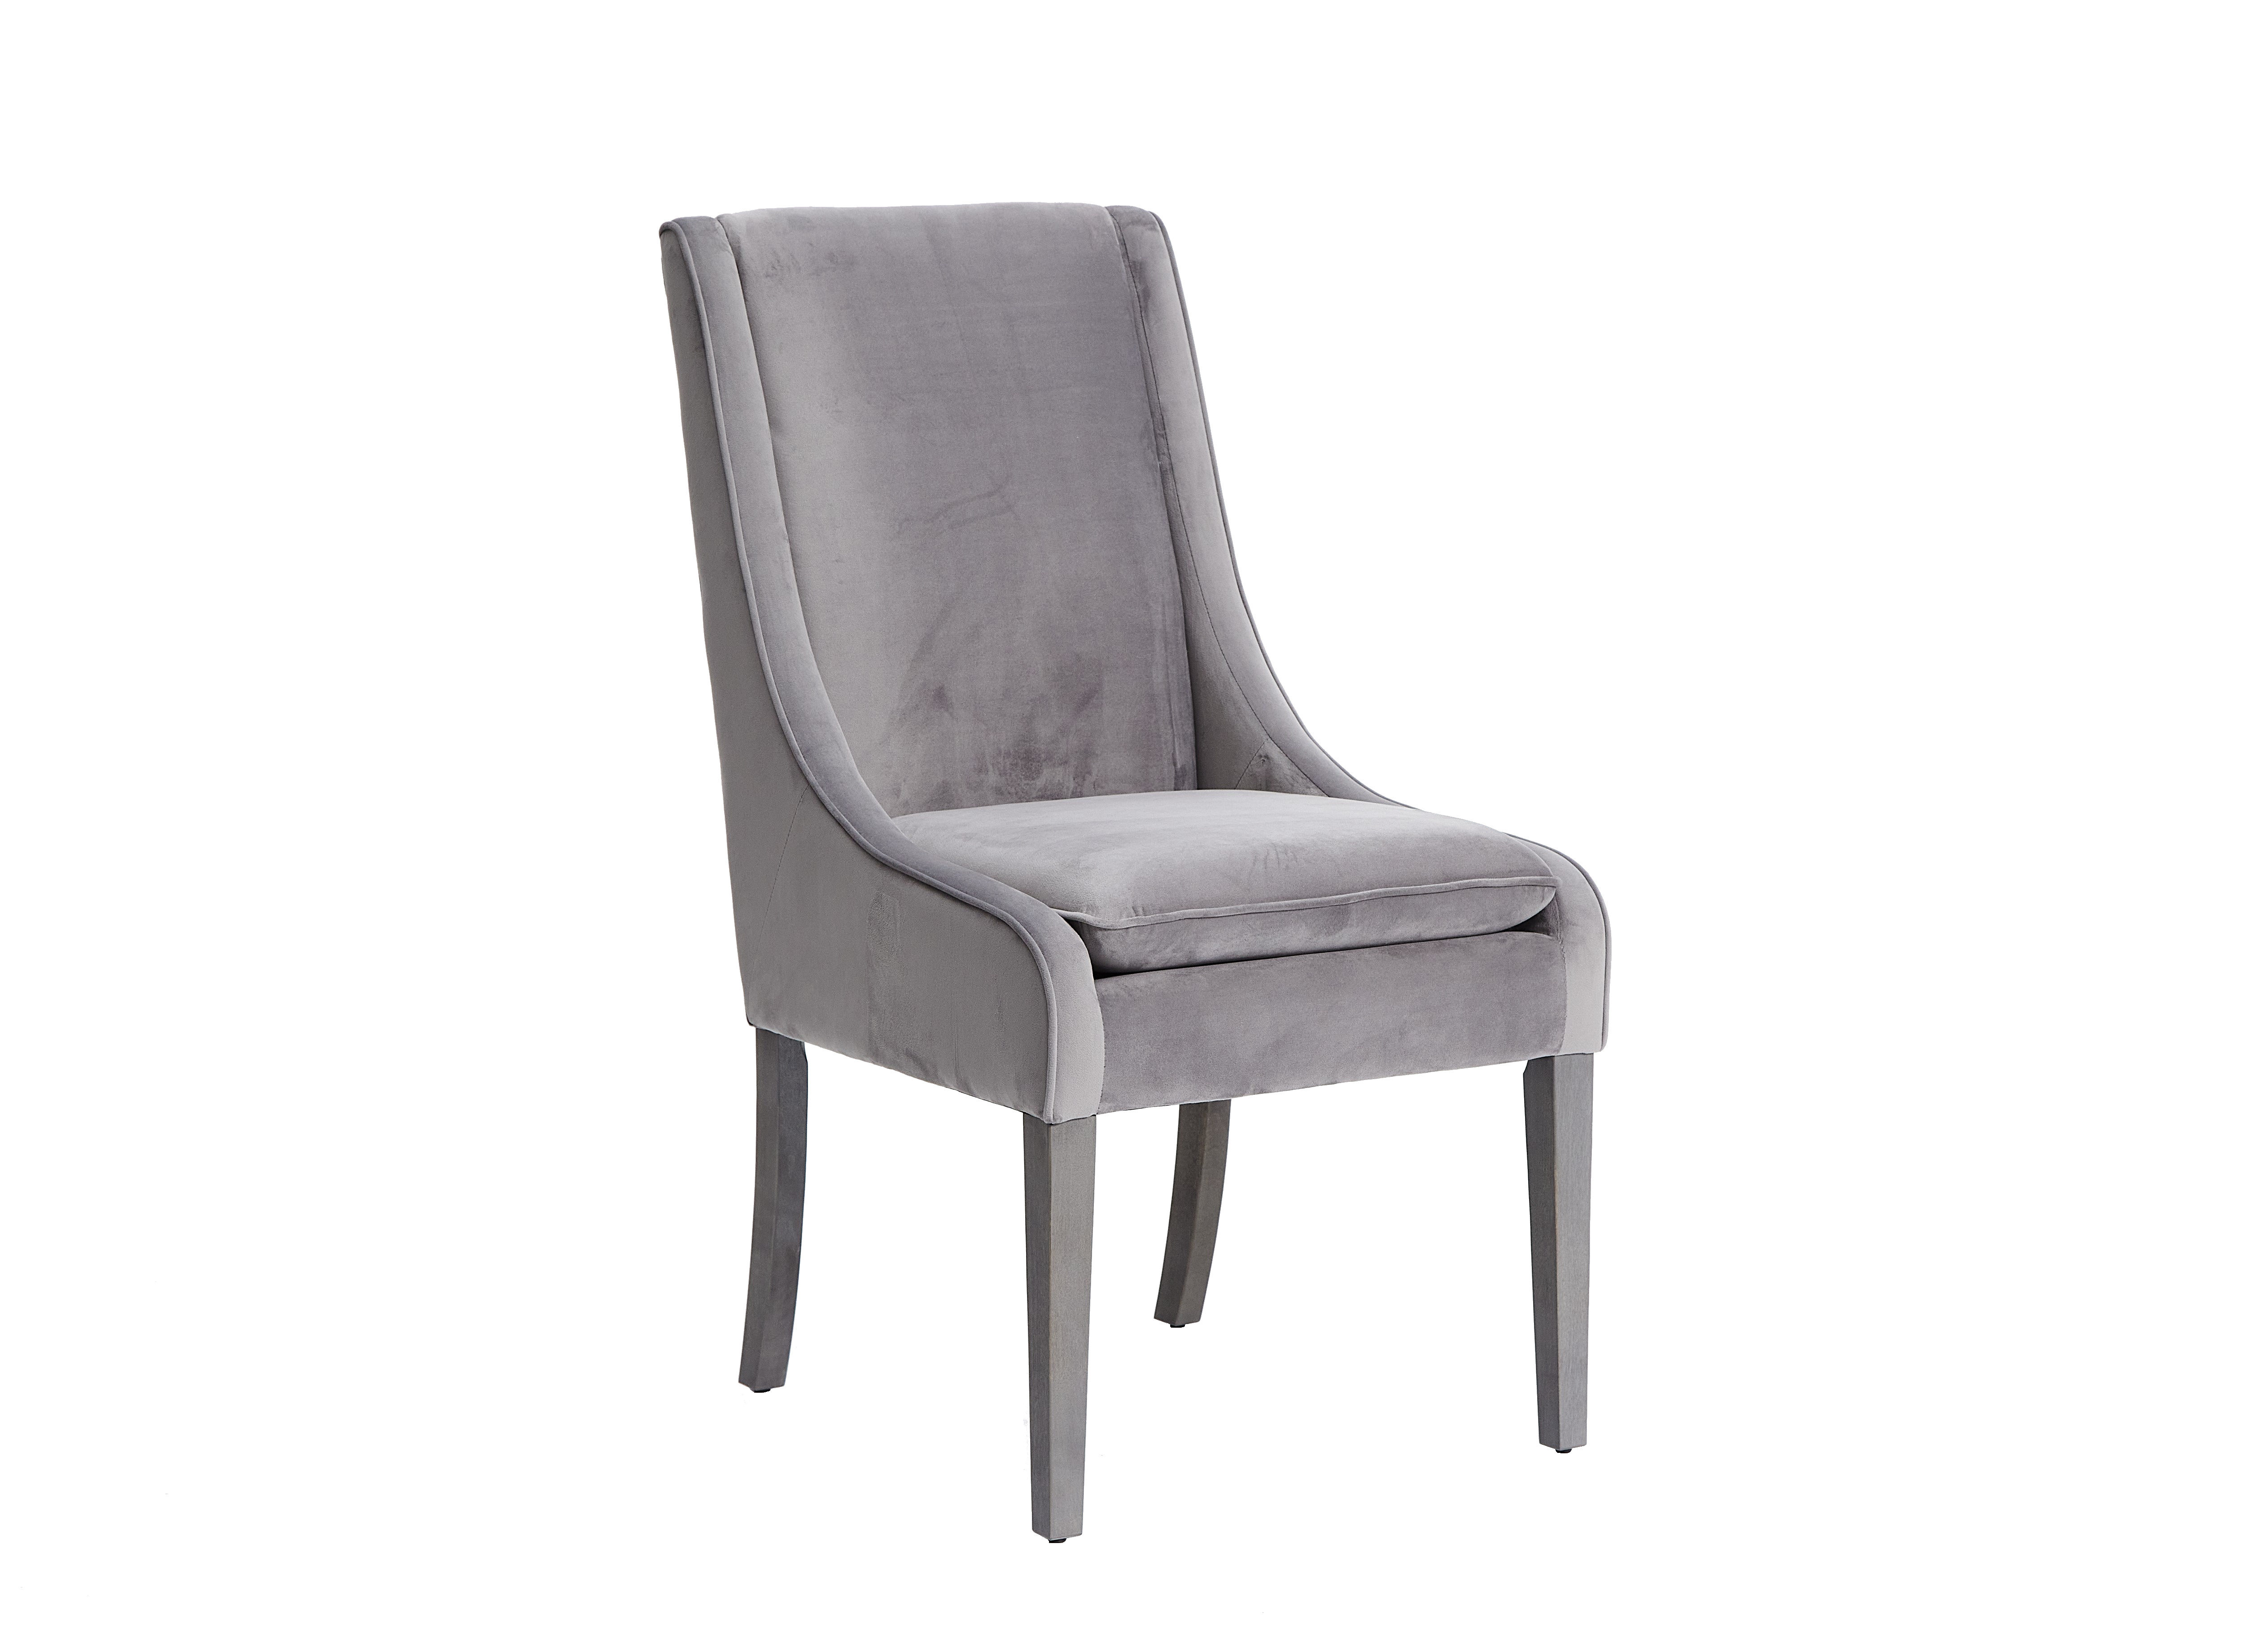 Miller Dining Chair - Grey